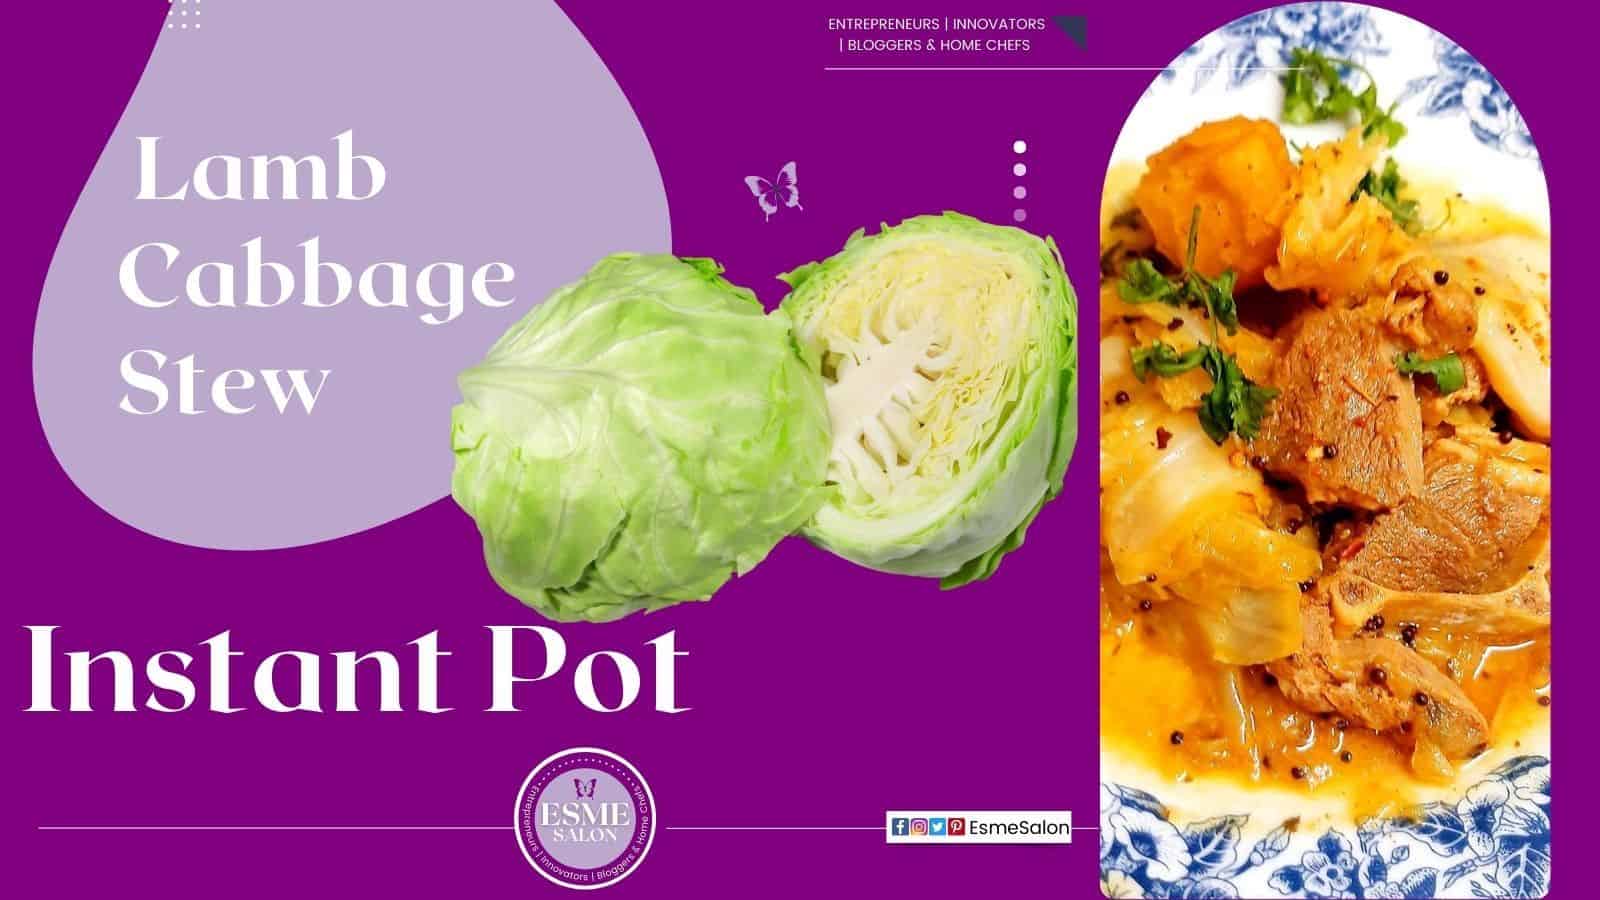 An image of Lamb Cabbage Stew made in an Instant Pot